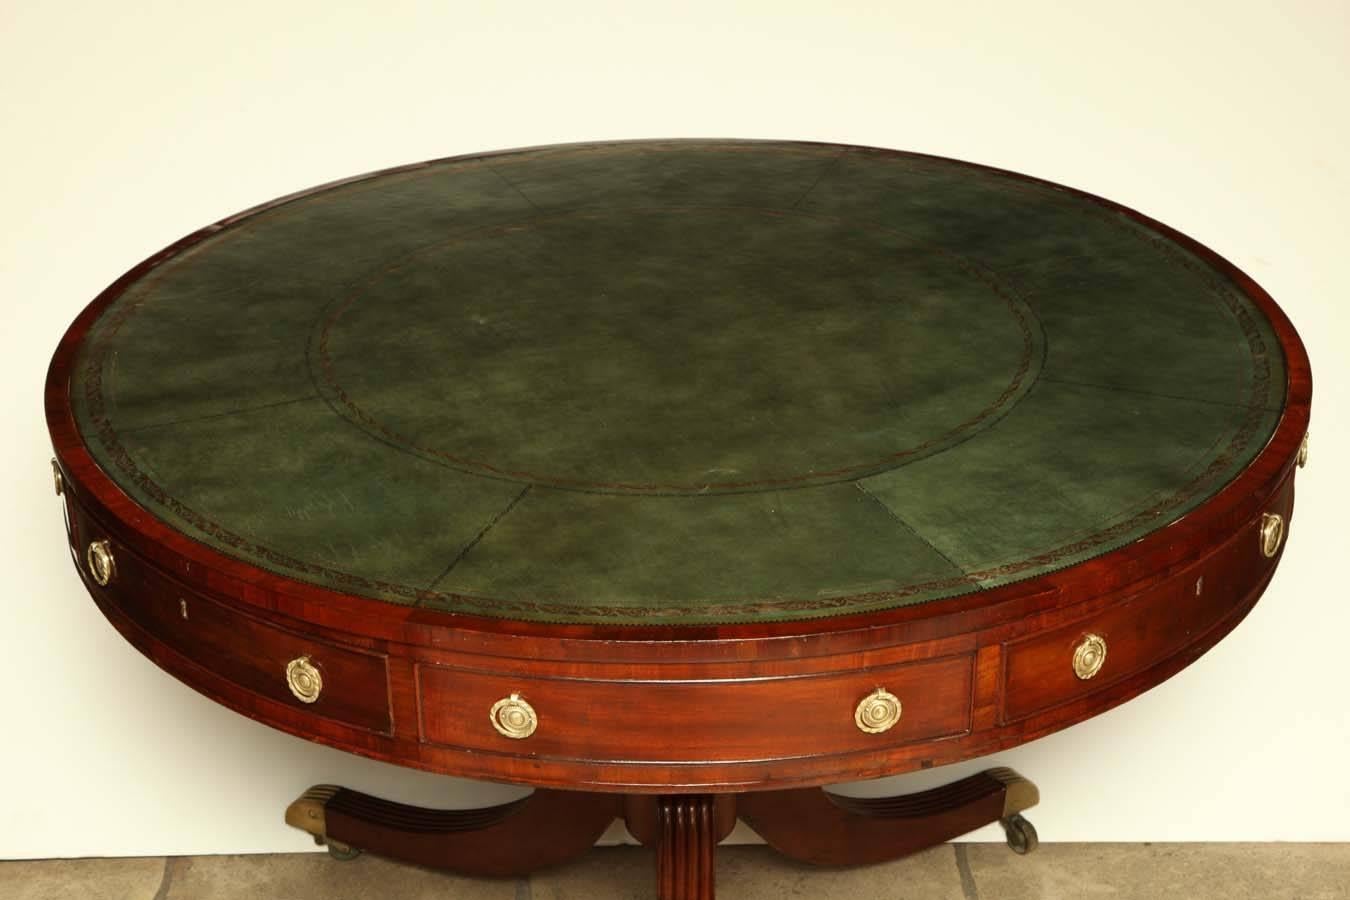 Regency mahogany round drum table with tooled leather top, reeded legs and brass caster feet.